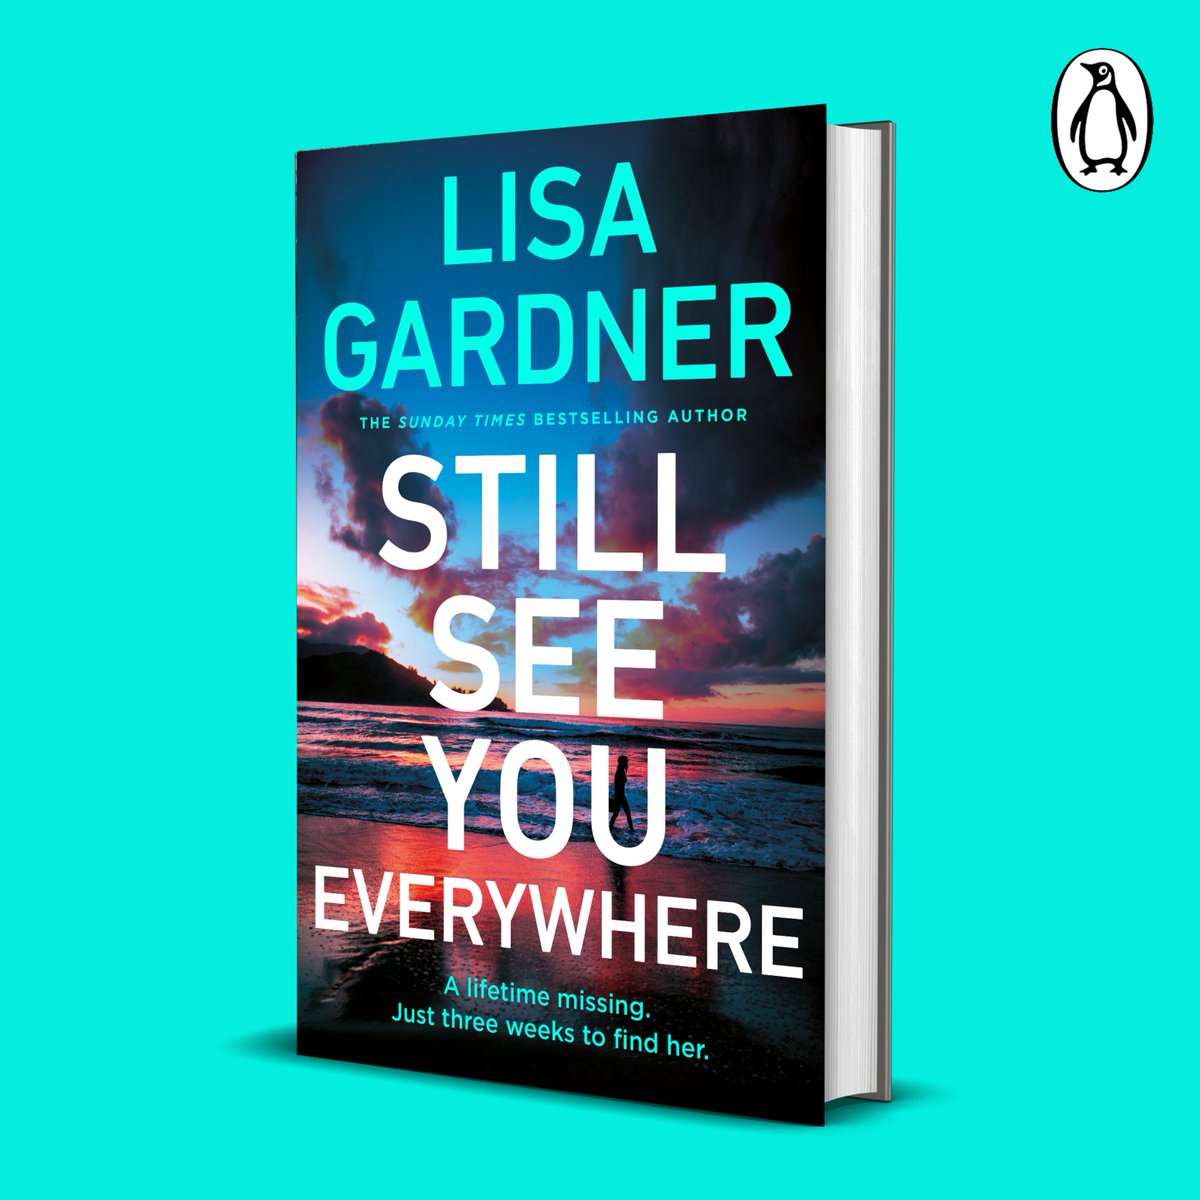 HAPPY UK PUB DAY! 🇬🇧🎉 I'm bouncing around the US on my book tour right now, but wanted to take a quick moment to let my UK readers know that STILL SEE YOU EVERYWHERE is available in stores and online. Amazon: bit.ly/43gzhEK Waterstones: bit.ly/3veU8vx